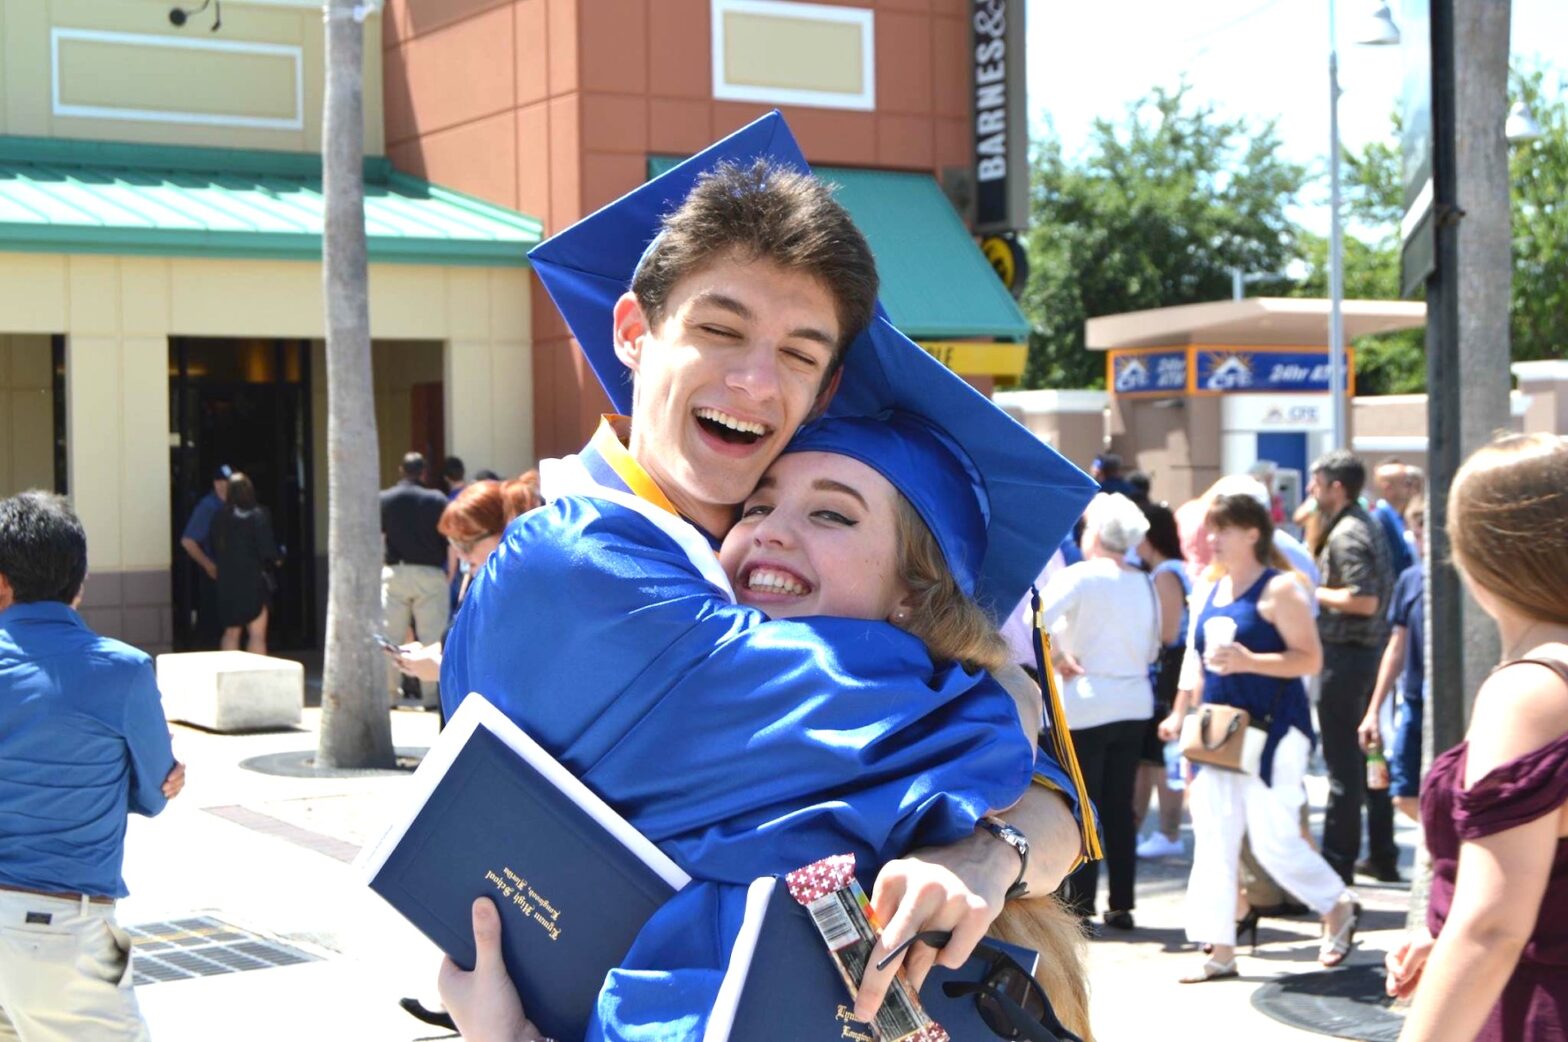 Carter at his high school graduation, hugging his friend Brittany.